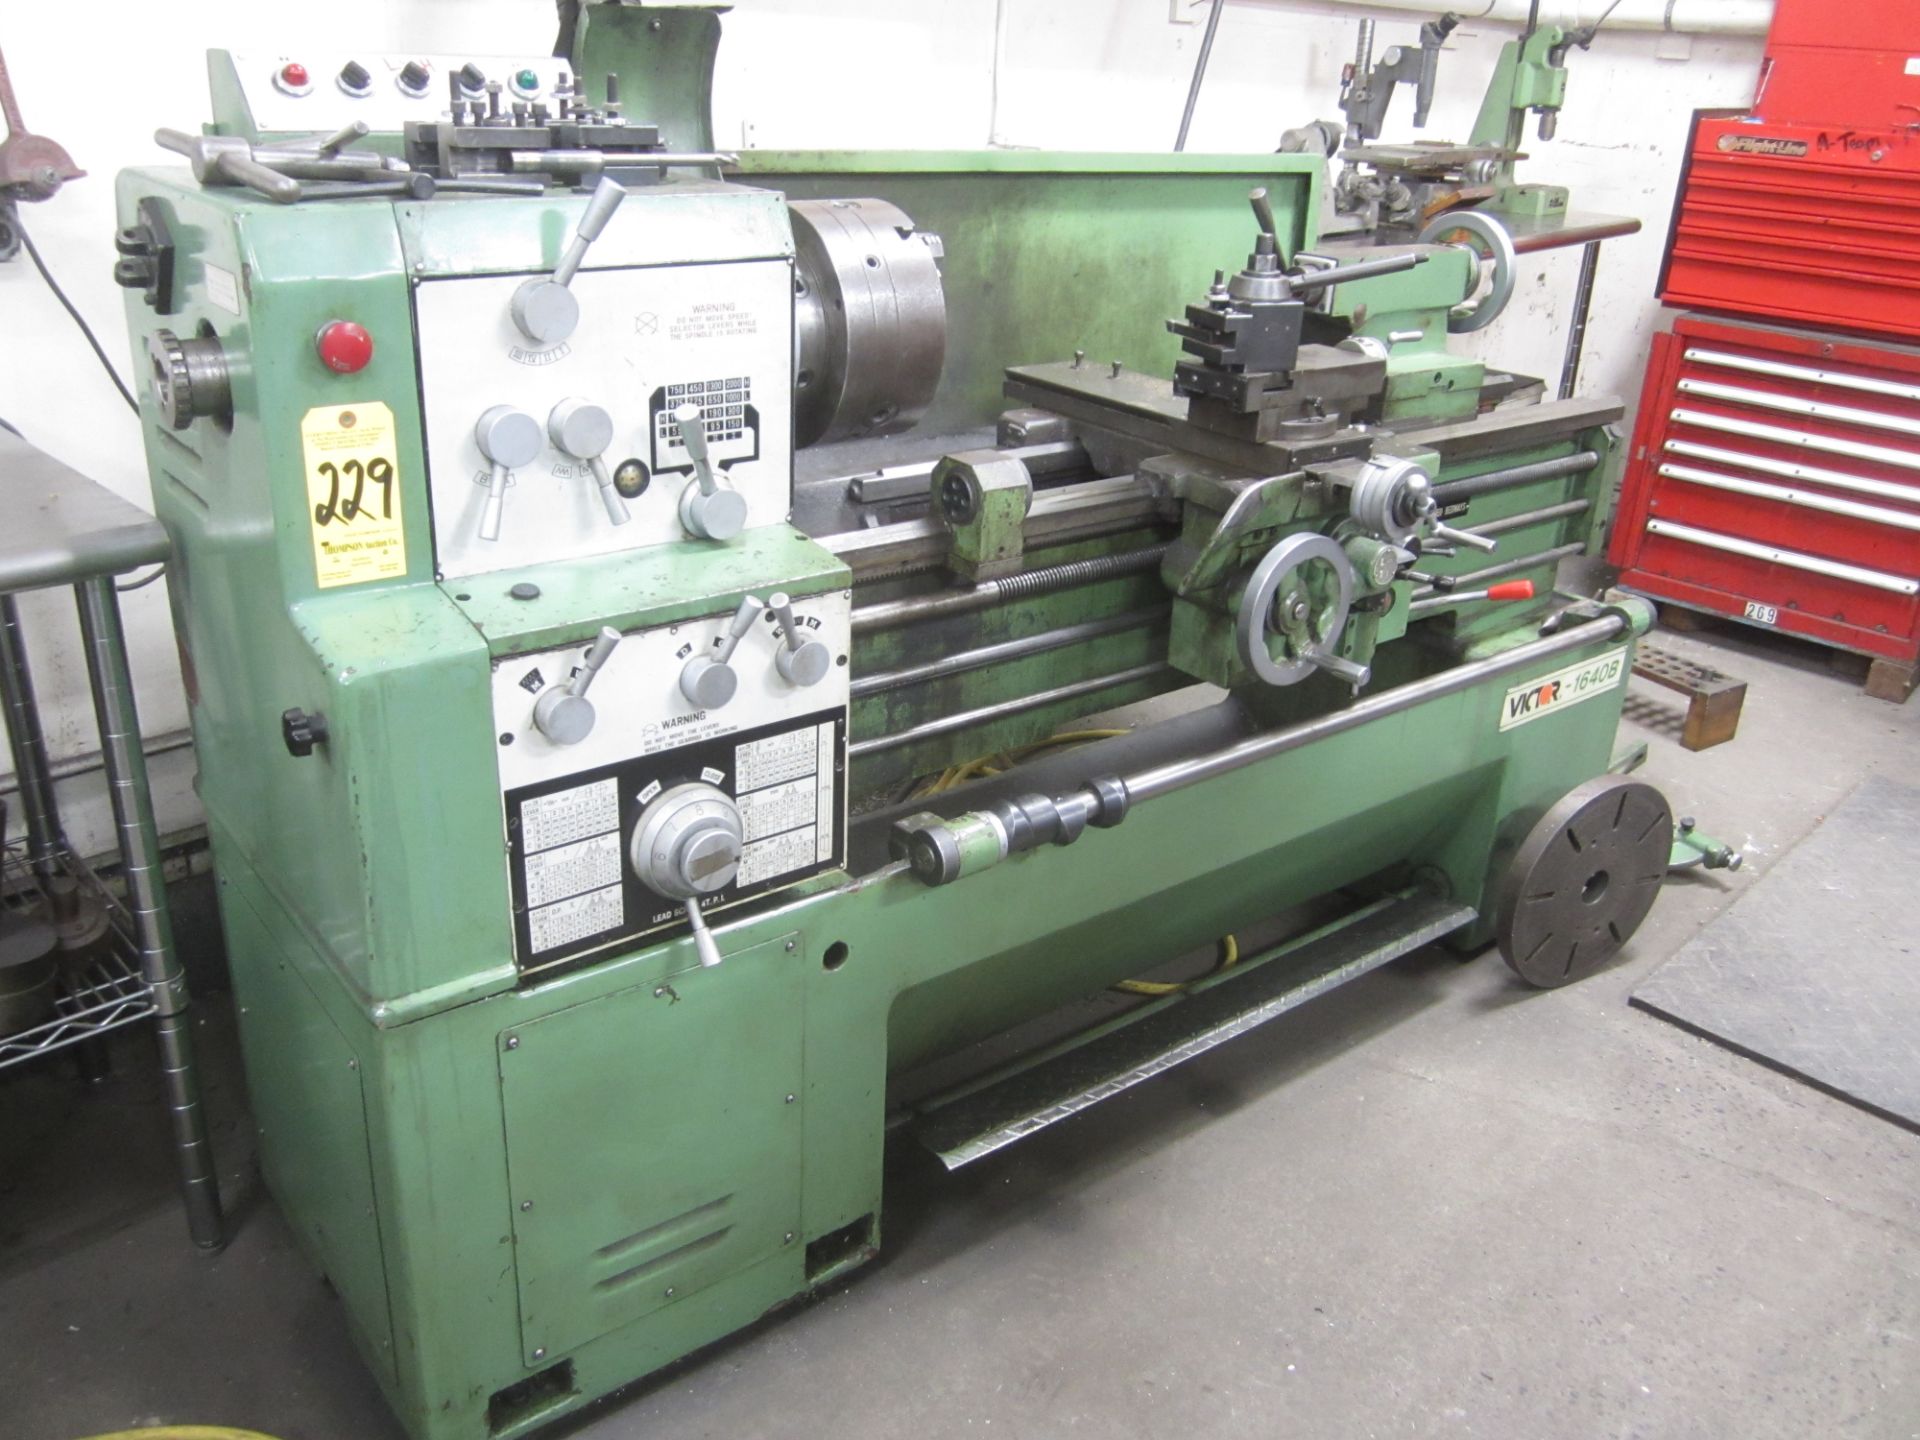 Victor Model 1640B Gear Head Engine Lathe, s/n 9071957, 16 In. X 40 In. Capacity, 5C Lever Type